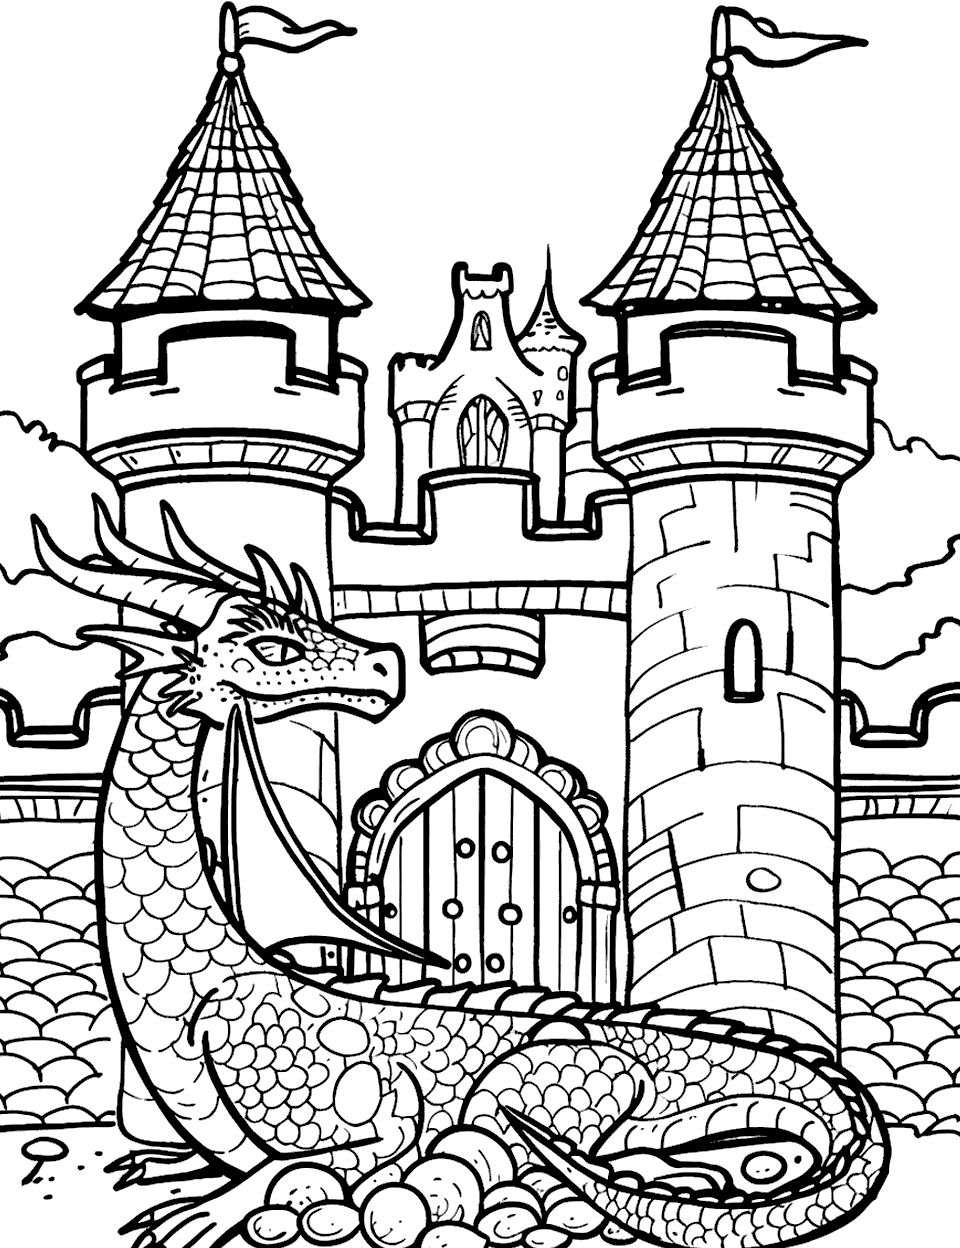 Dragon Guarding Castle Coloring Page - A fierce dragon curled in front of a castle gate.